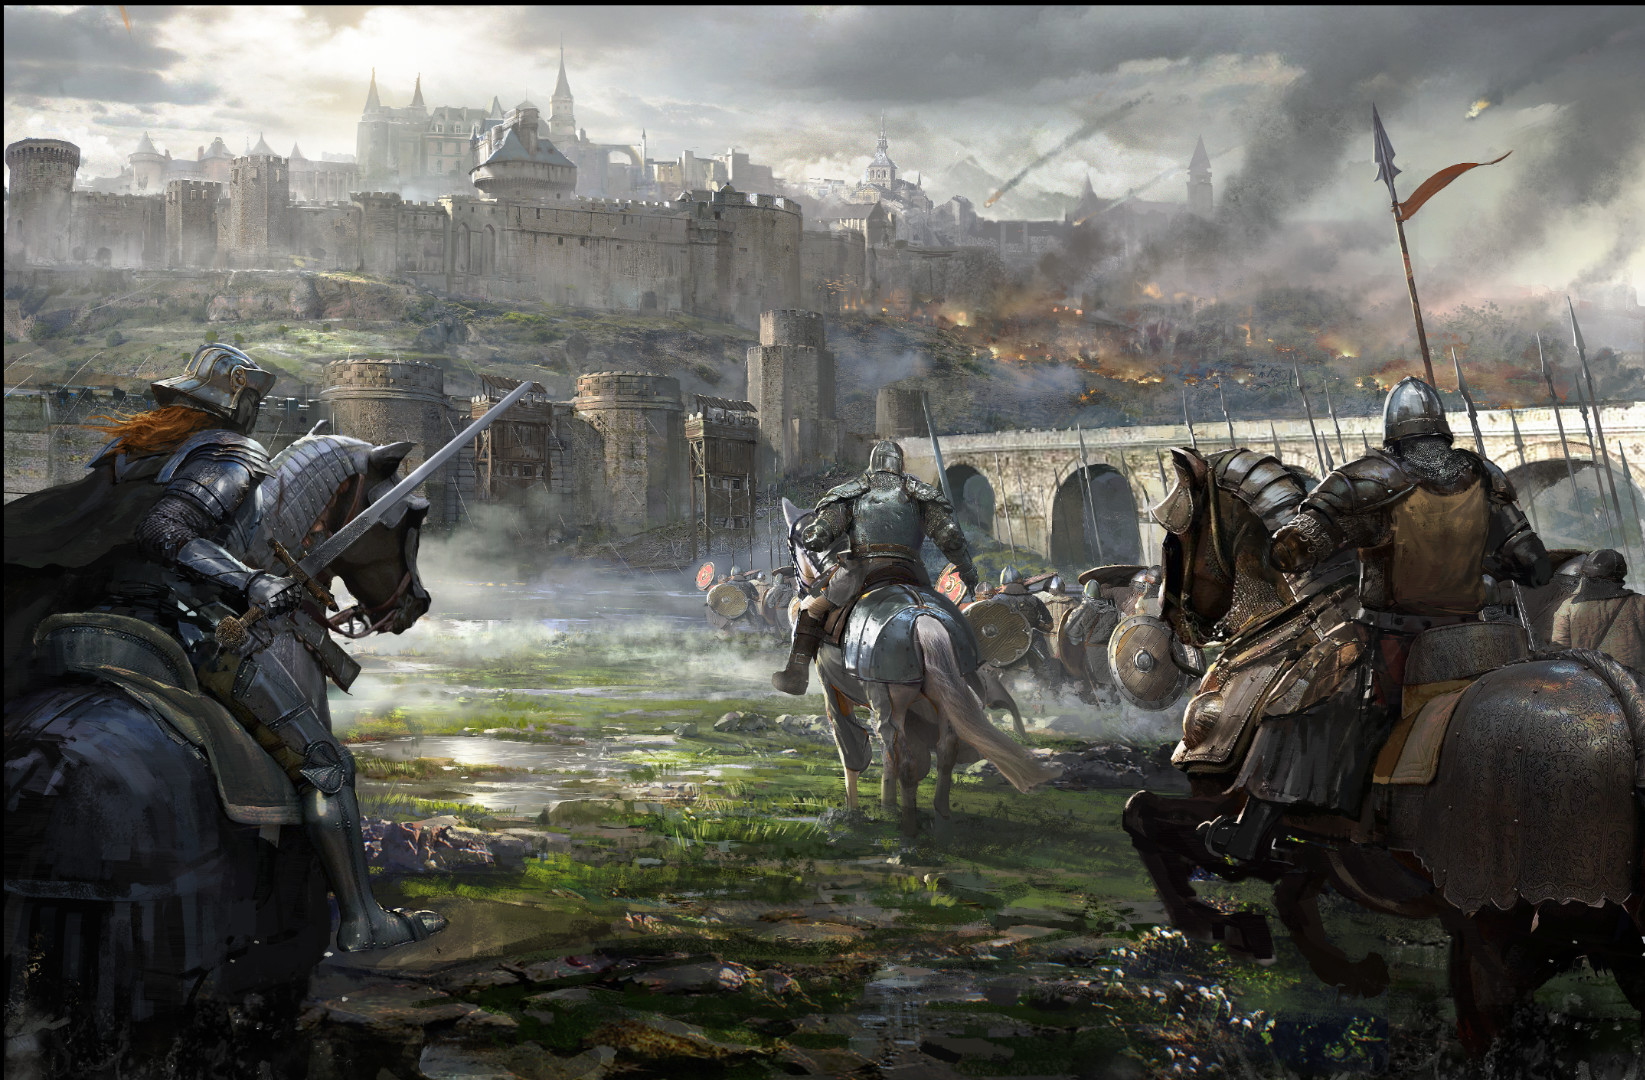 General 1645x1080 fantasy art fantasy castle knight horse army battle assault structures wall